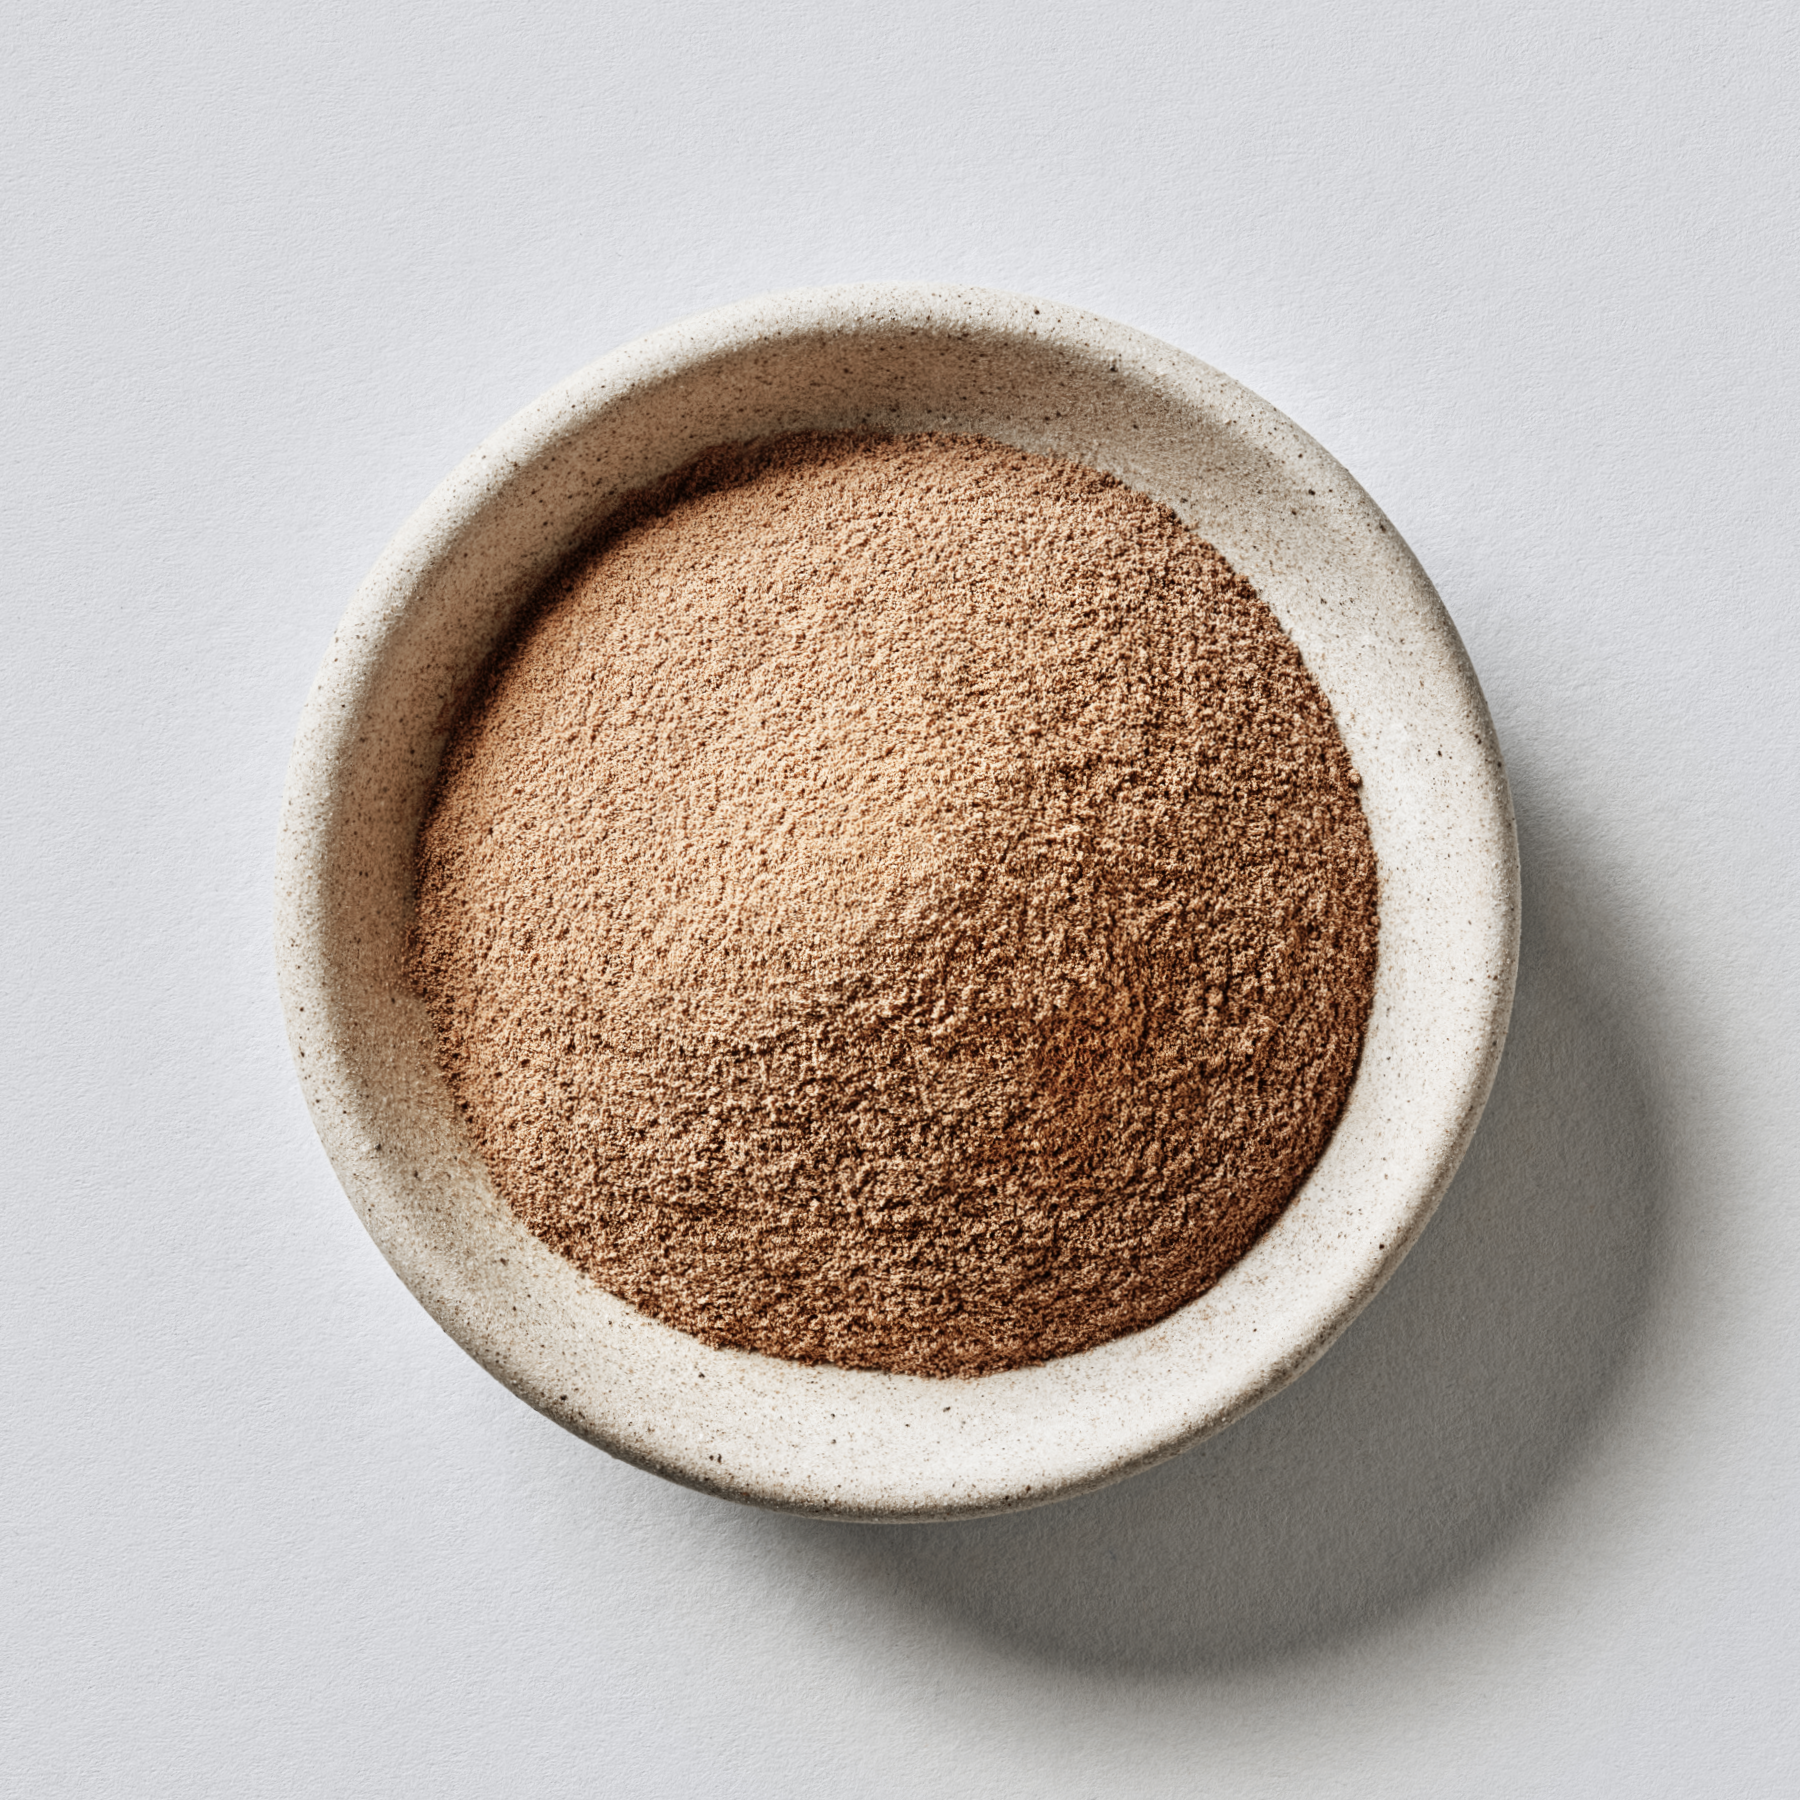 Sports Research Collagen Peptides Powder Chocolate in a ceramic bowl.